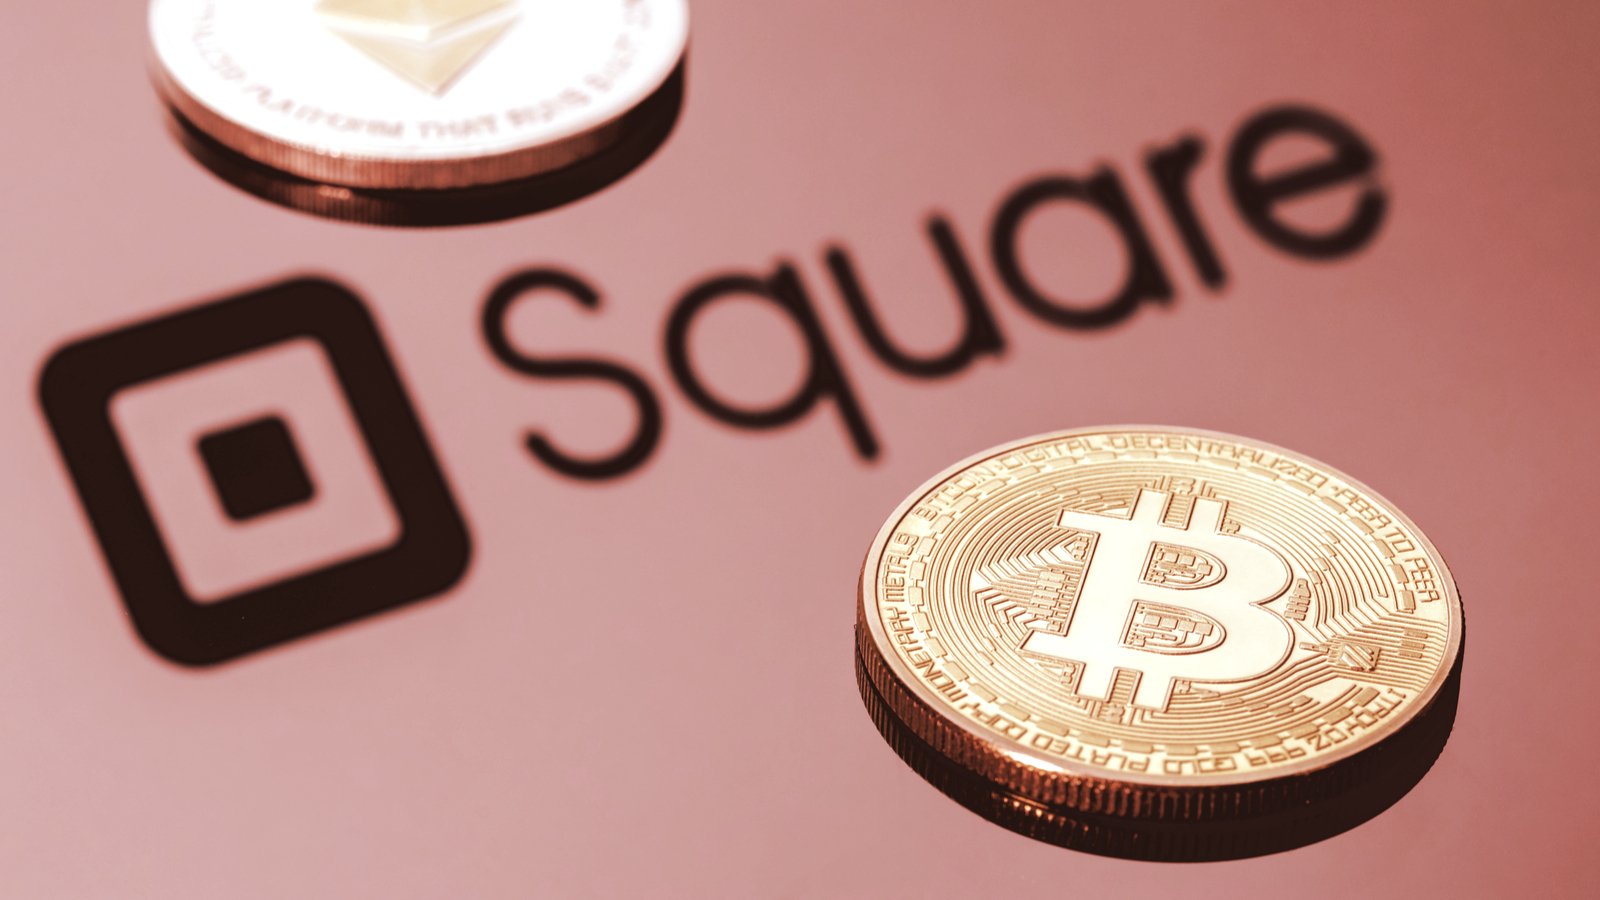 Square Joins Patent Group to Protect and Promote Bitcoin Innovation